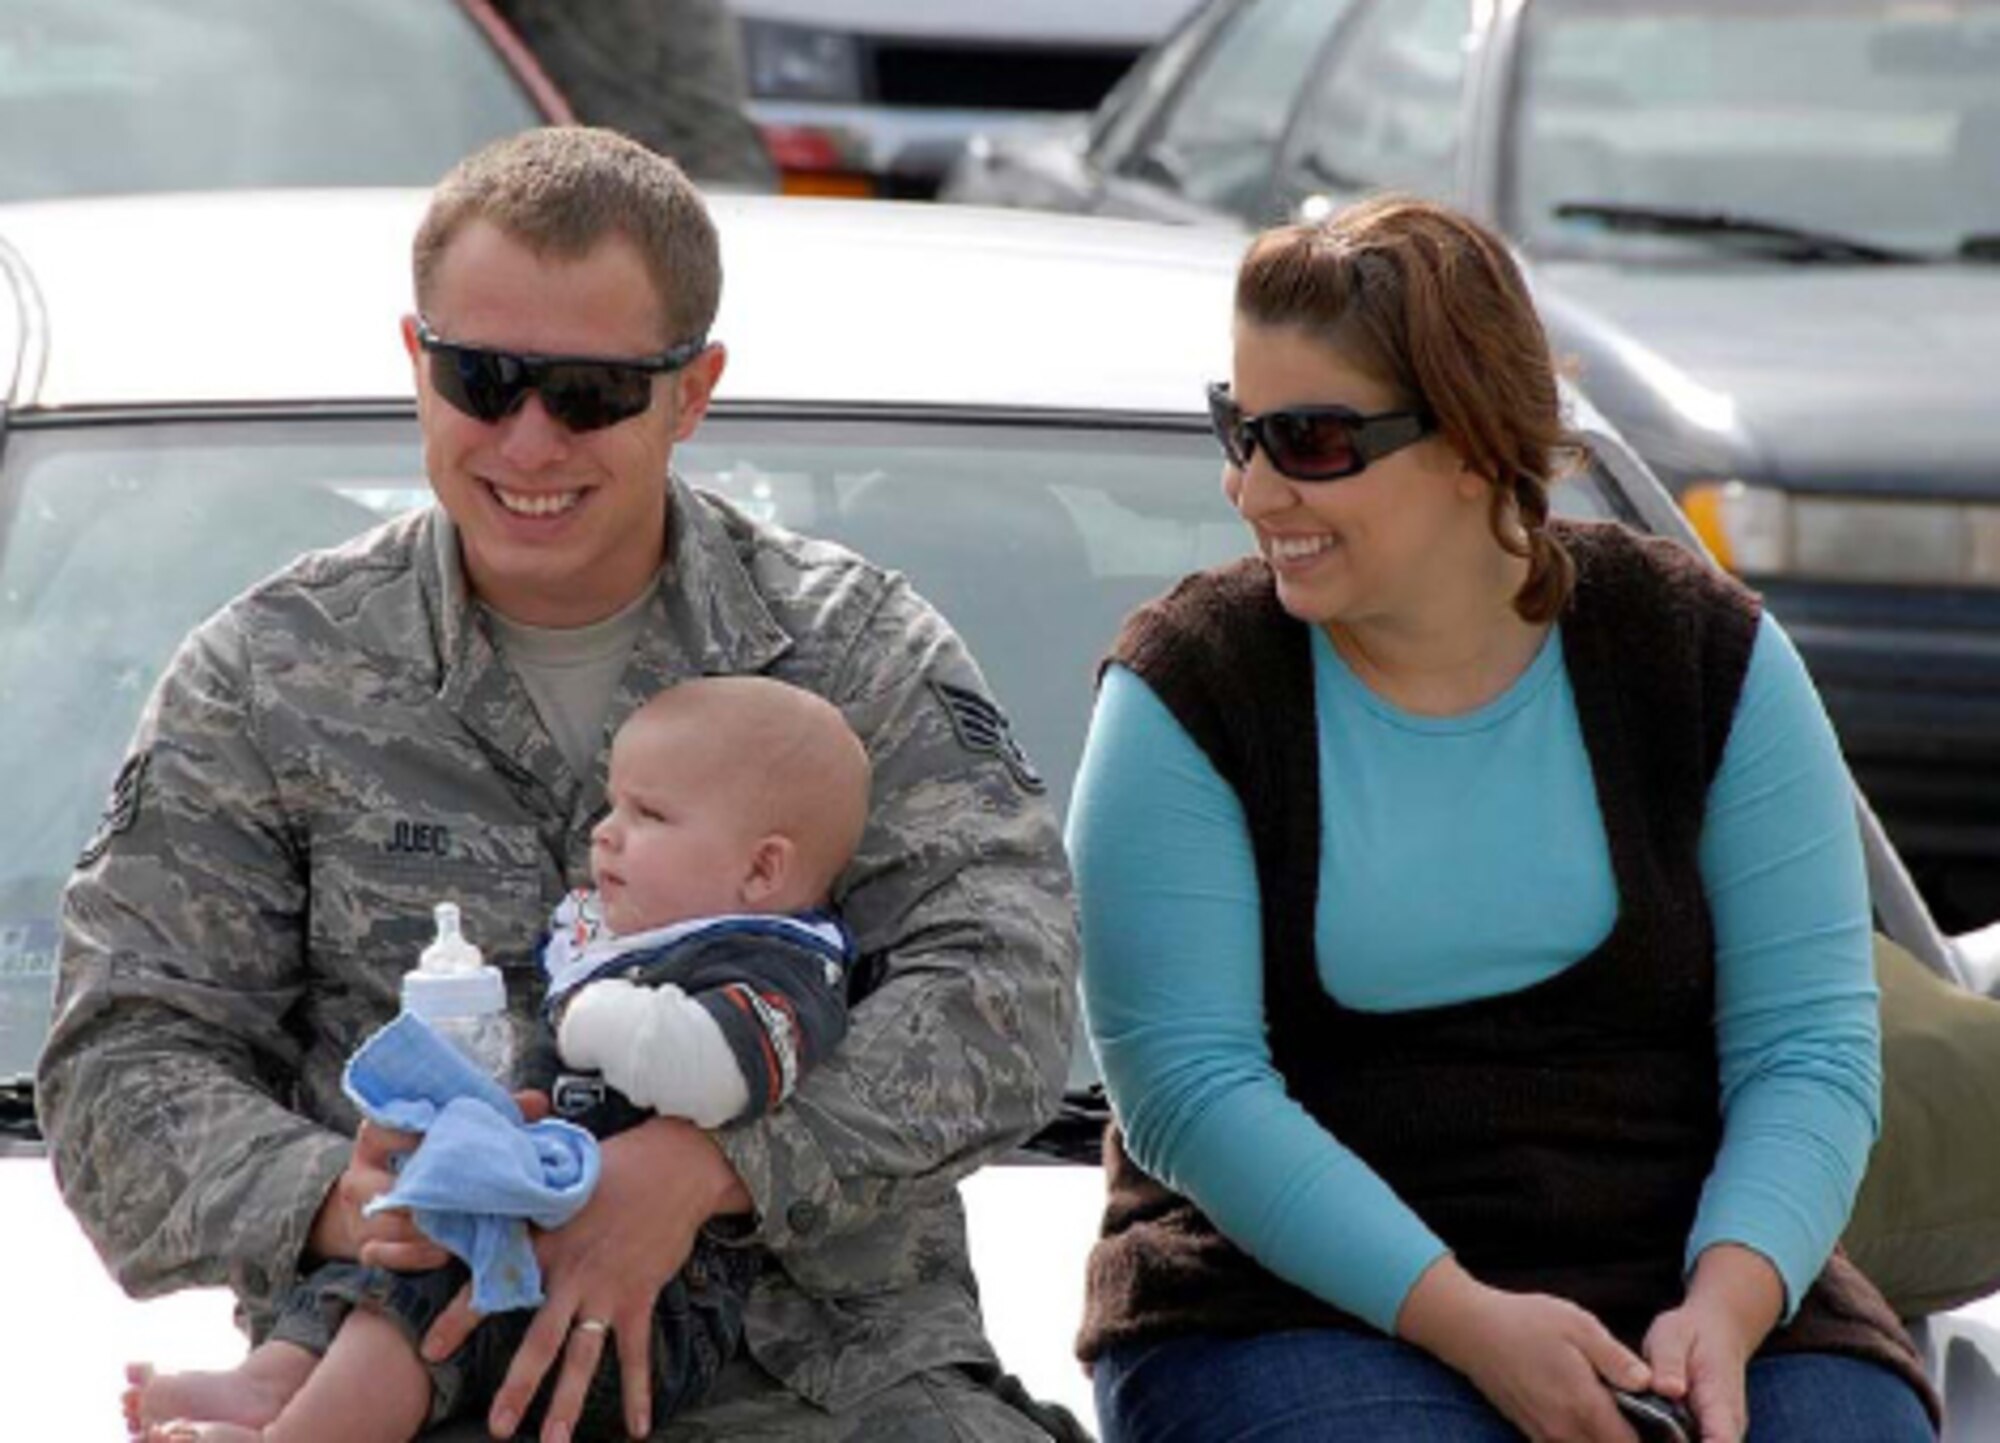 Staff Sgt. Bradley Judd of the 182nd Maintenance Squadron is joined by his wife Nichole and his five-month old son Payton shortly after arriving back in Peoria Oct. 14. The returning group of aircrew, maintainers, and other support personnel had departed for the 182nd Airlift Wing’s first rotation of the Air Expeditionary Force (AEF #1) August 23. Photo by Tech. Sgt. Todd A. Pendleton